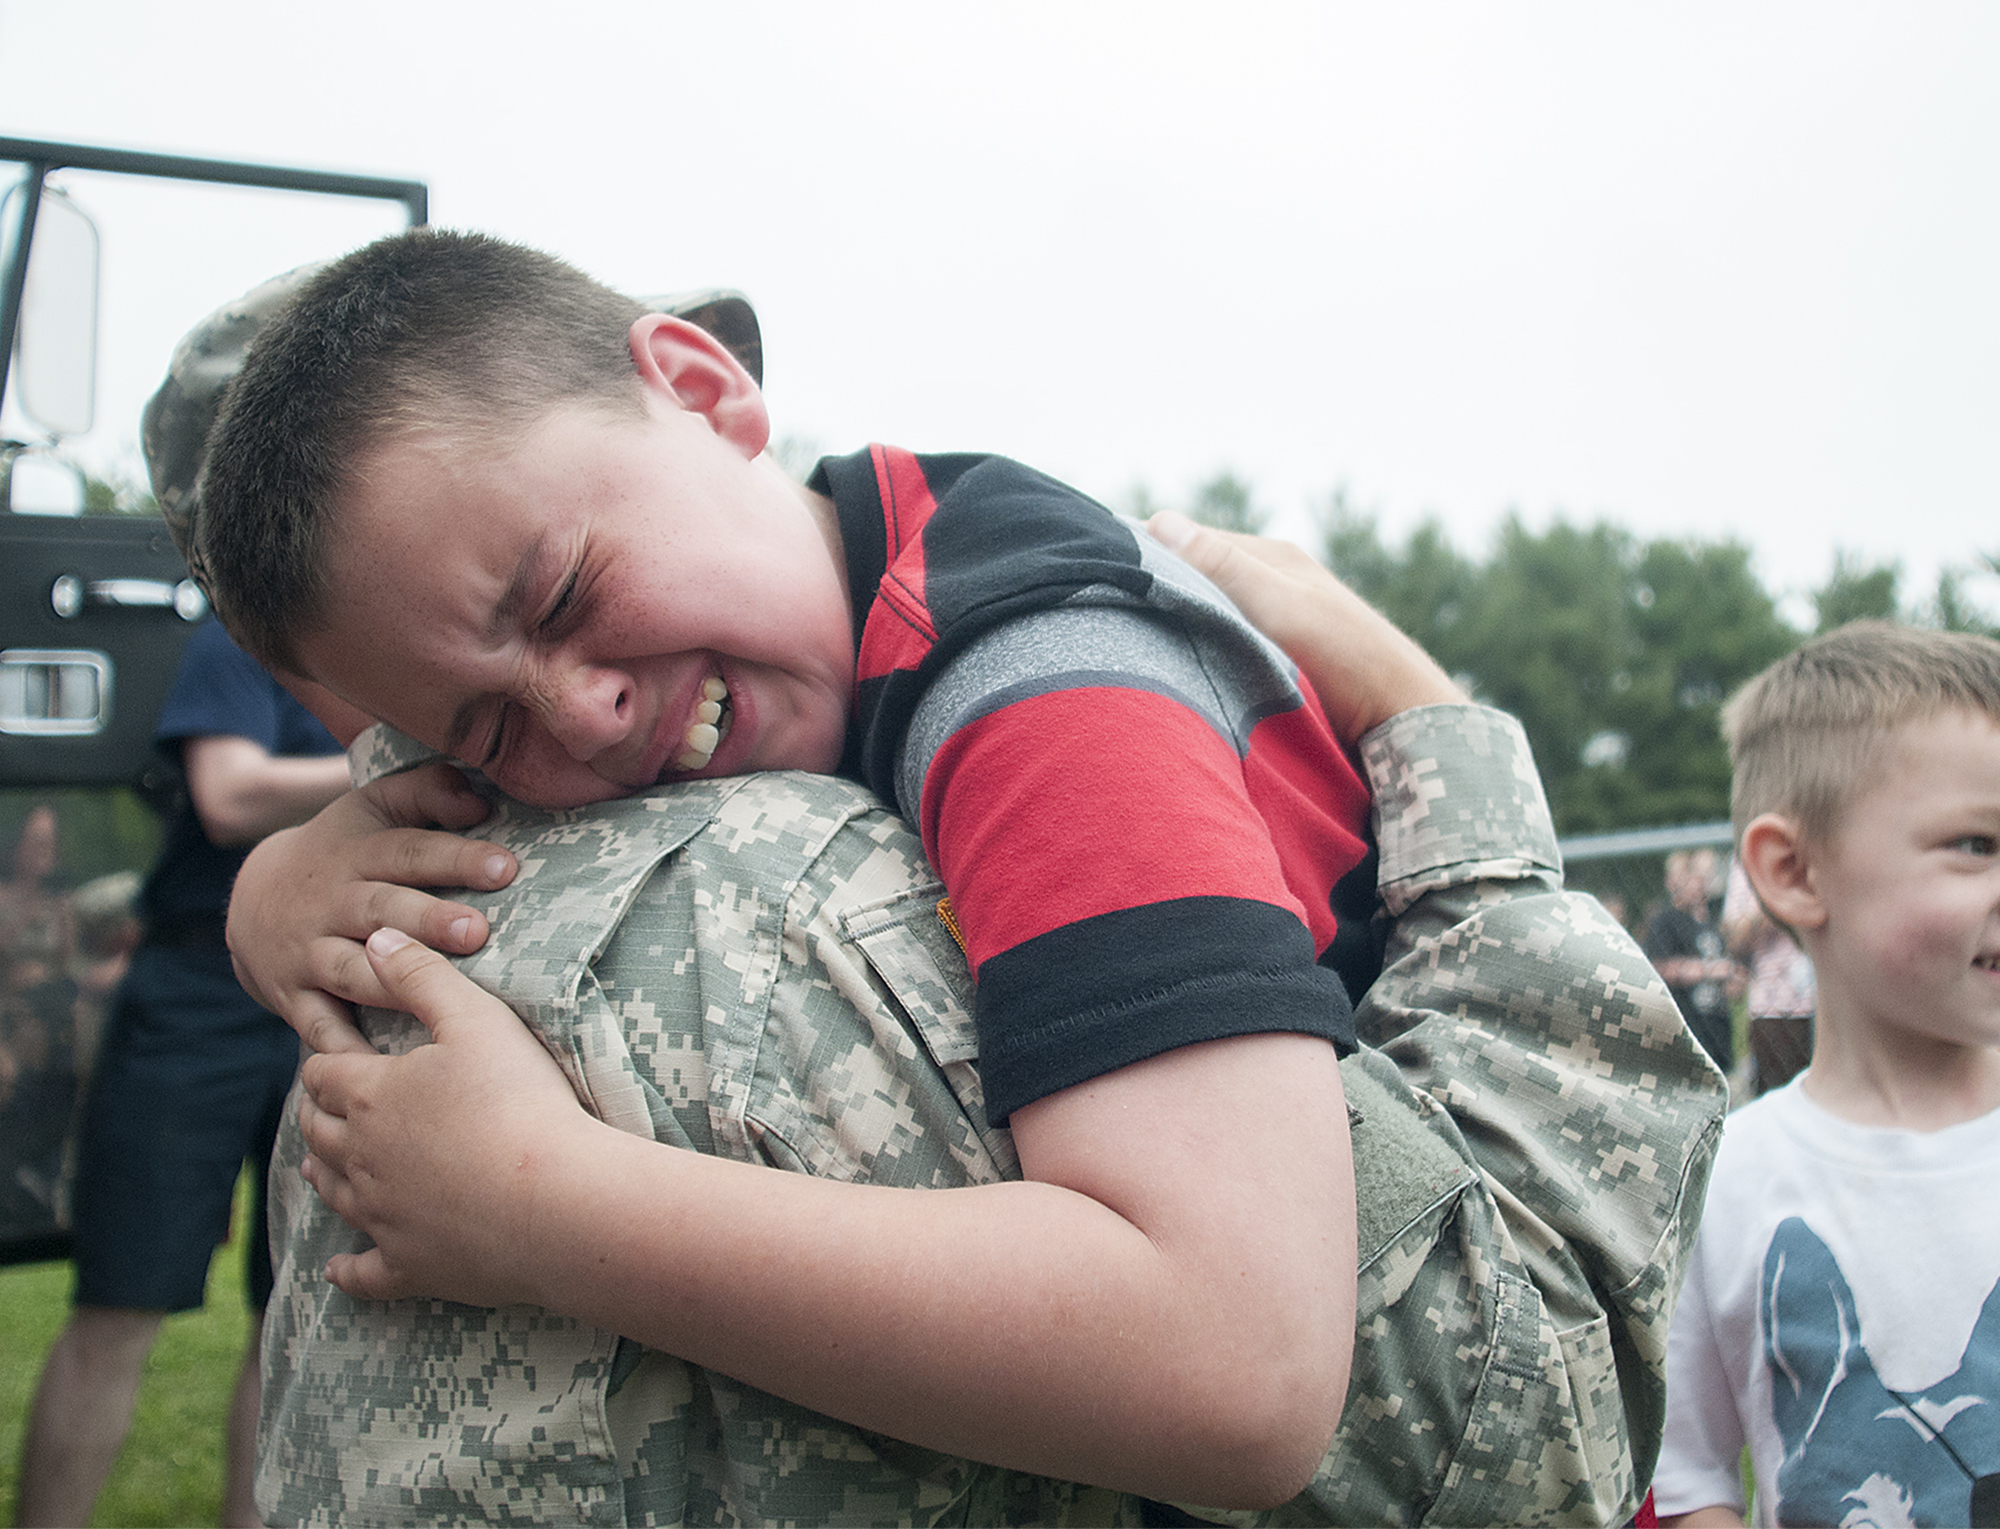  Len Cassidy III, 11, a 5th grader at Lower Southampton Elementary School, is overcome with emotion while hugging dad, Staff Sergeant Len Cassidy, 35, during a surprise homecoming in which Principal Michelle Burkholder organized a routine fire drill 